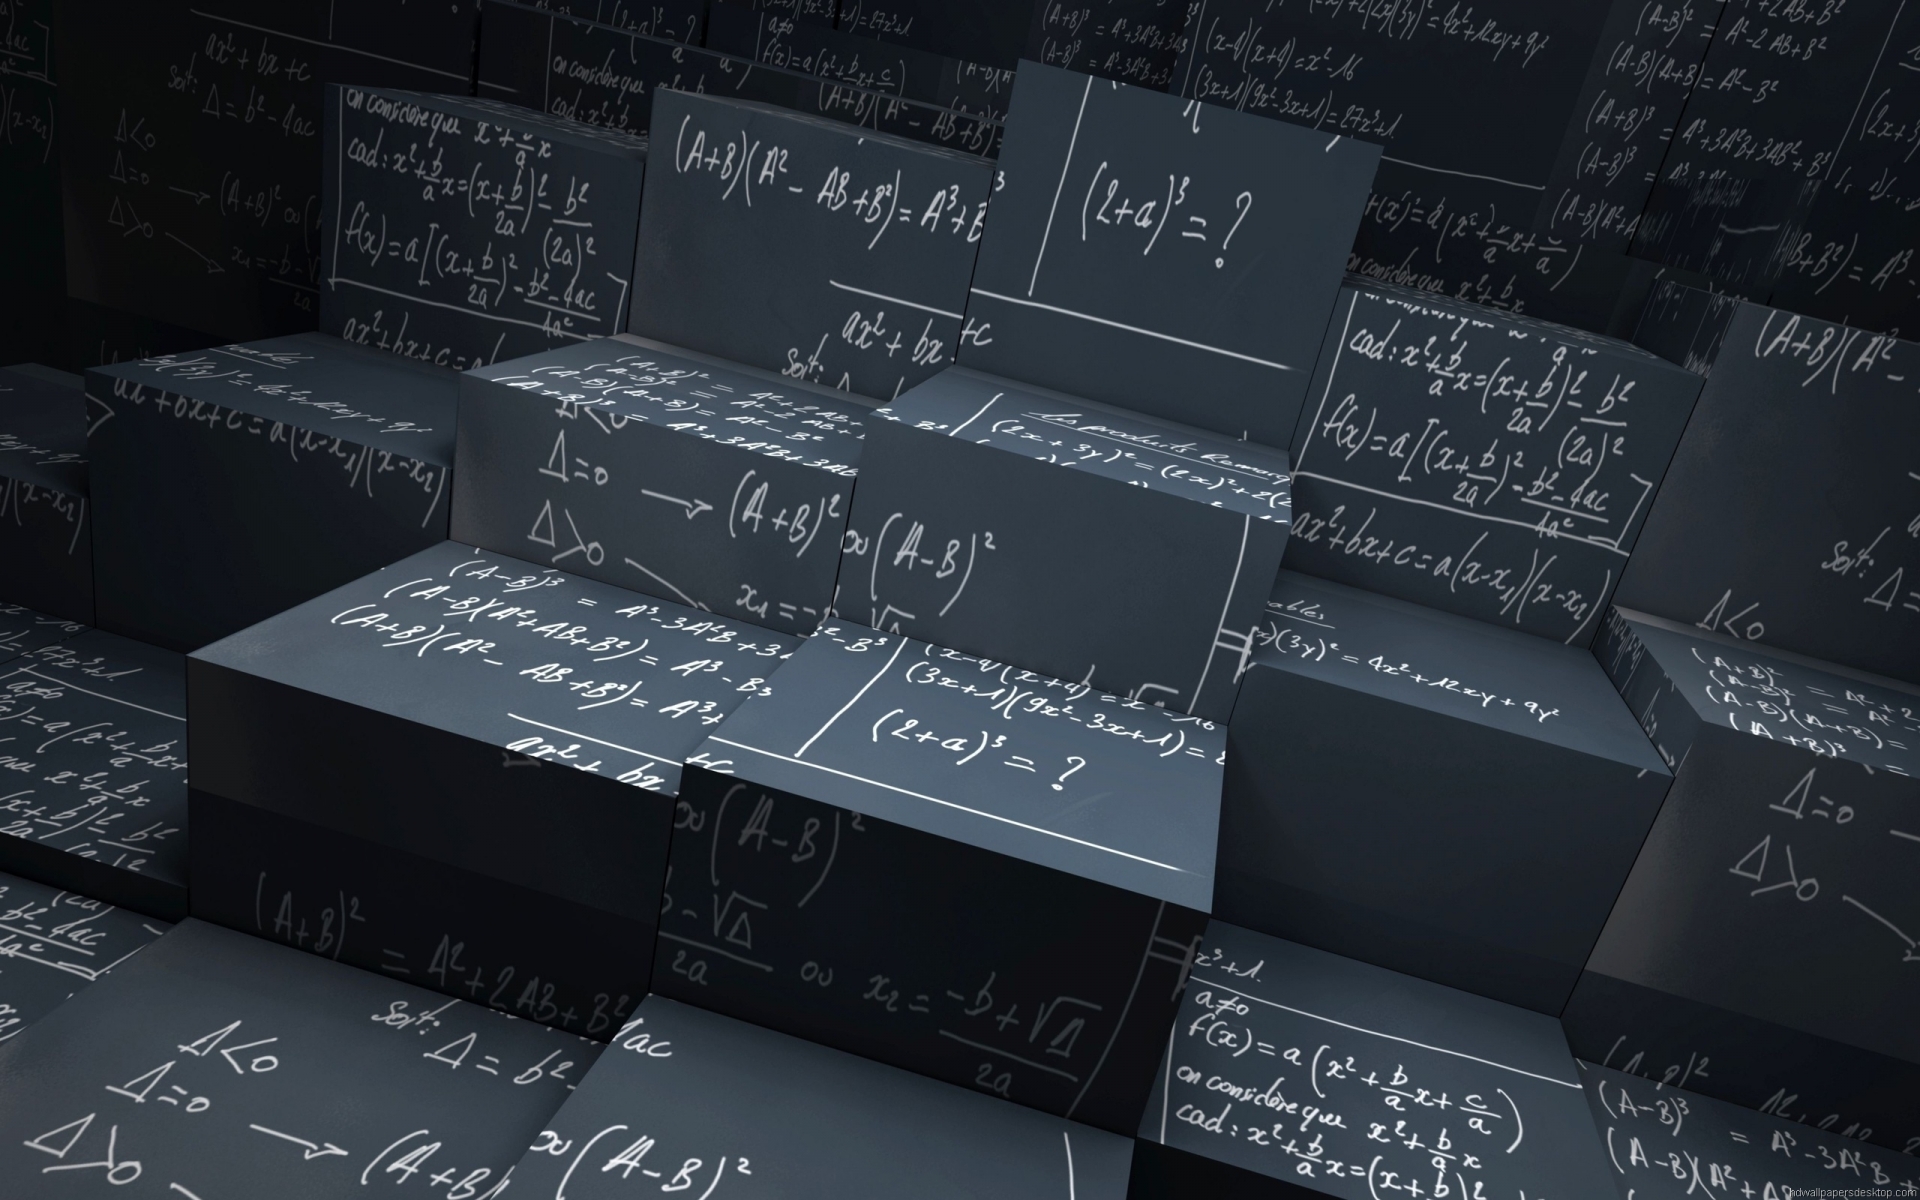 Equations for 1920 x 1200 widescreen resolution